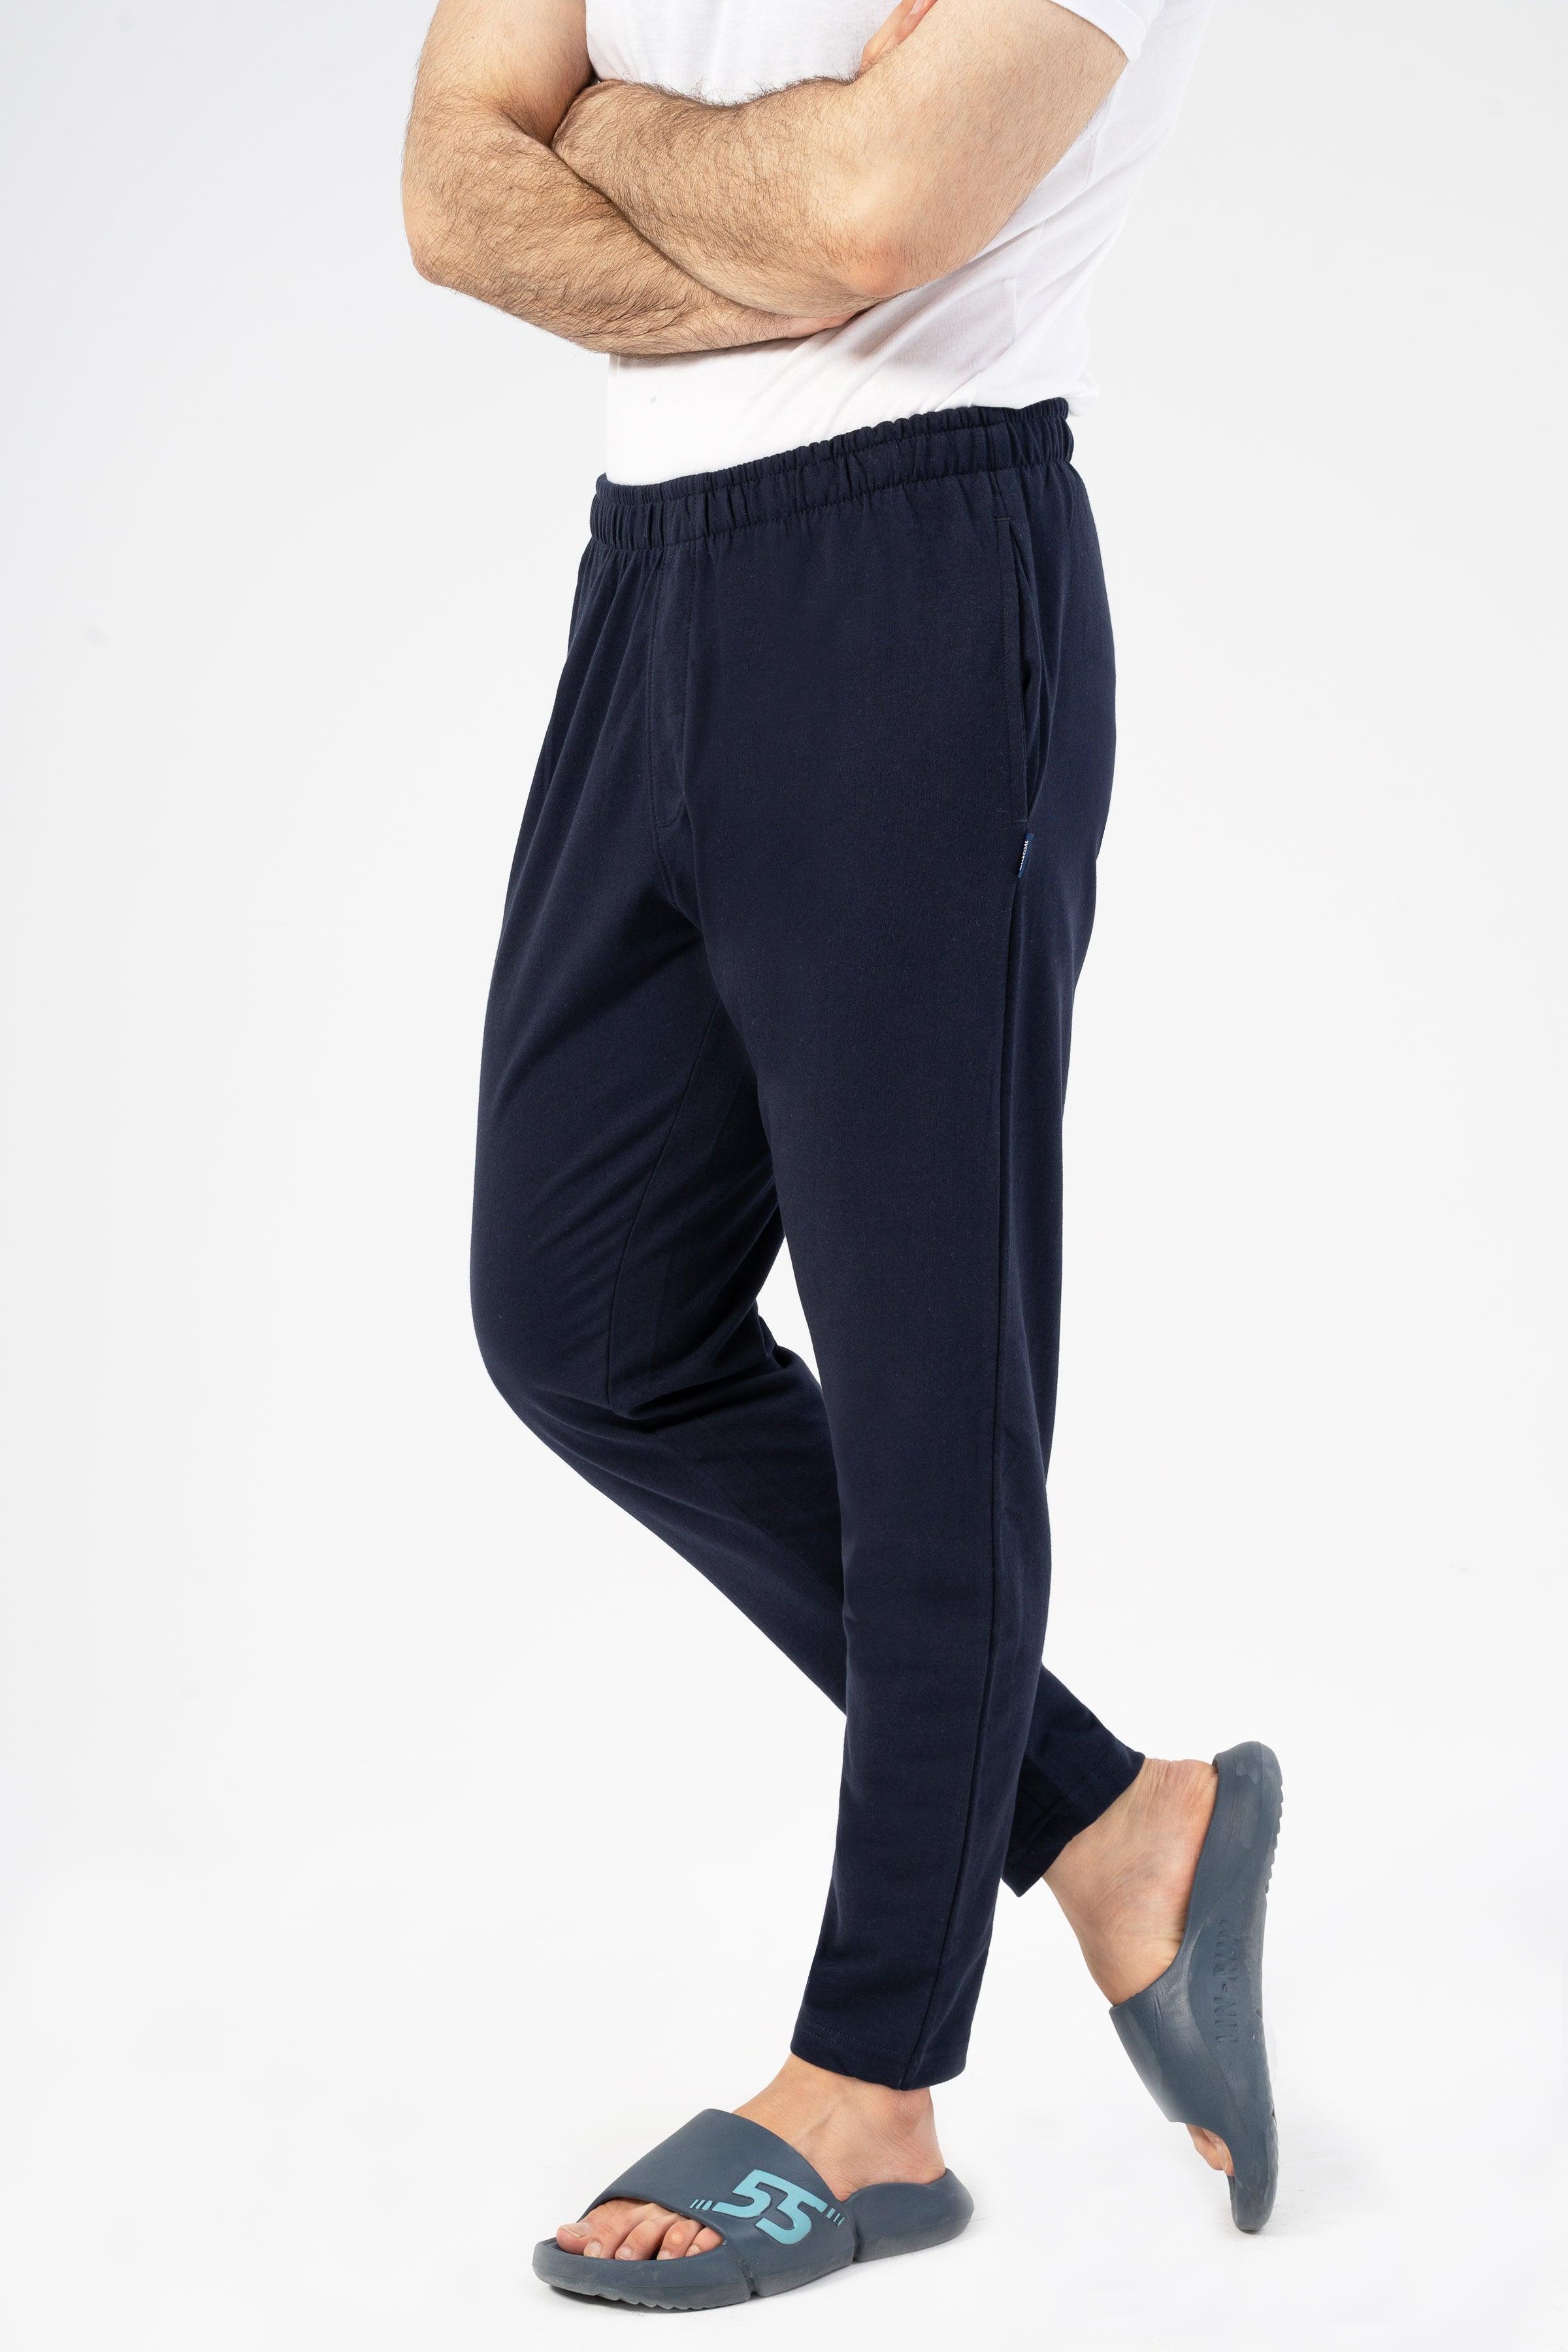 ULTIMATE COMFORT SLEEPWEAR PANT NAVY at Charcoal Clothing